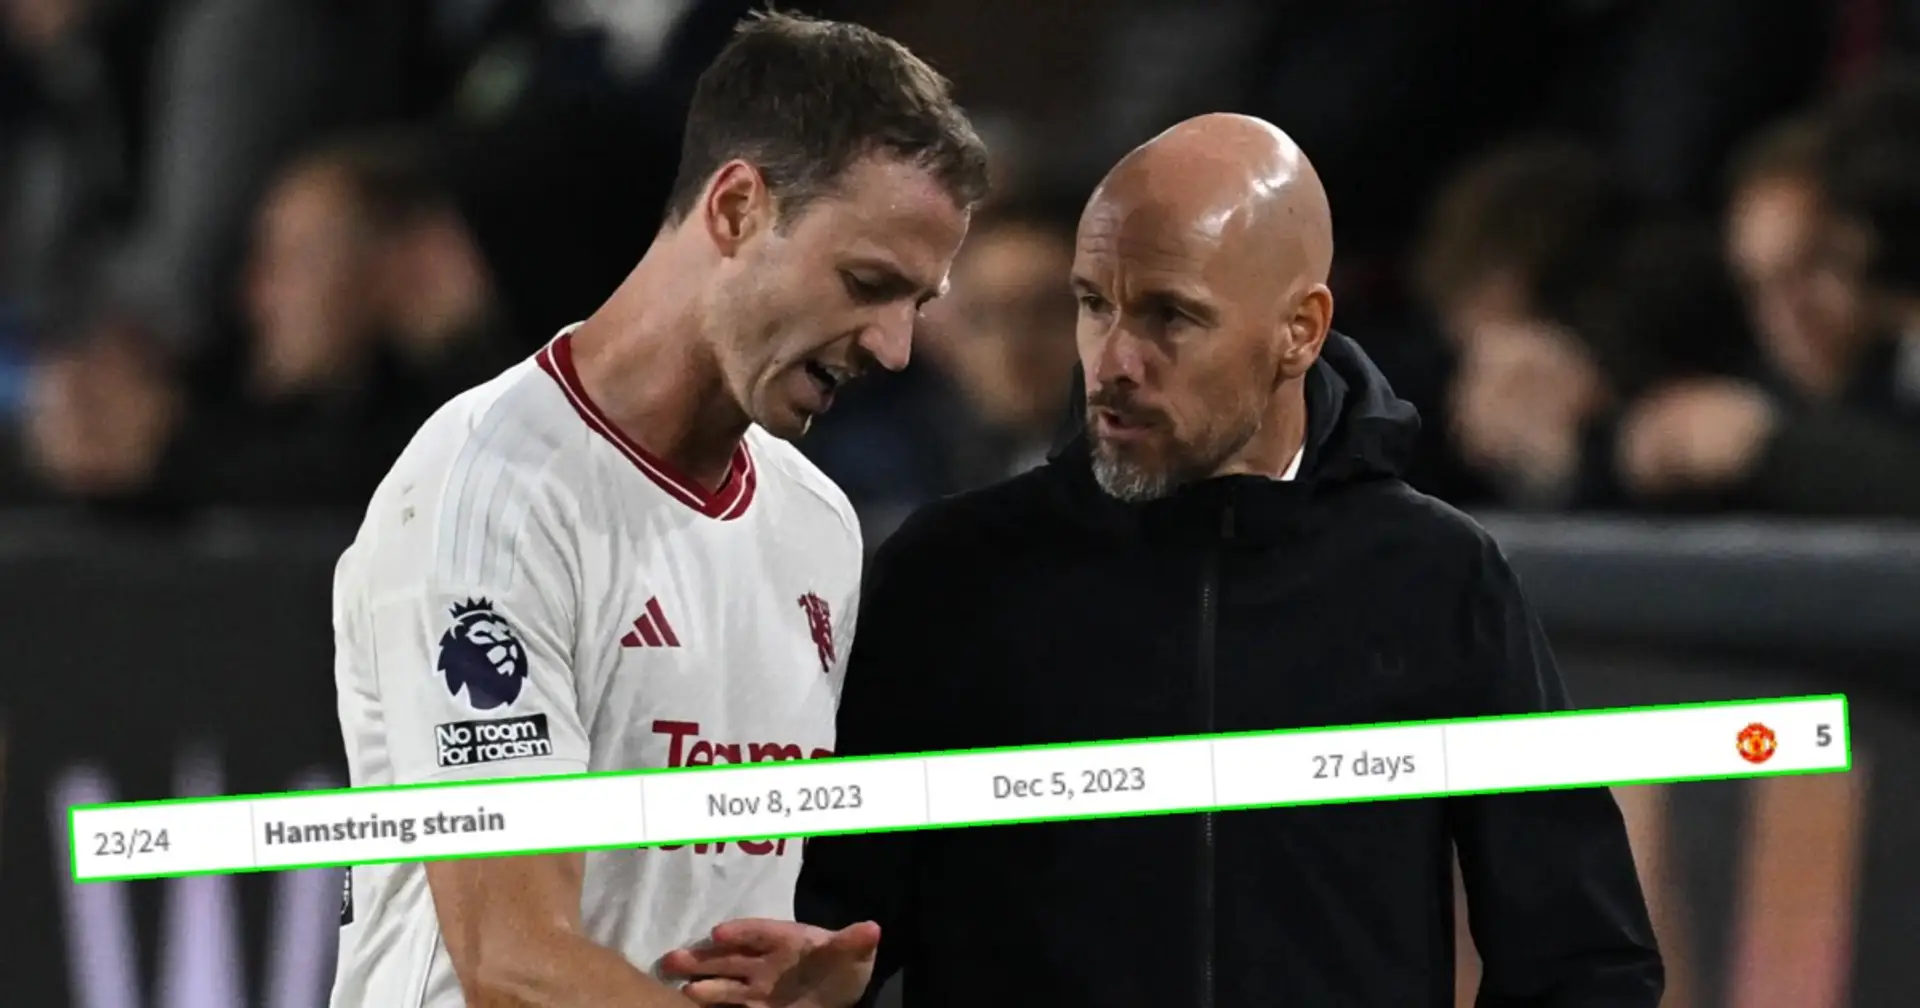 No record of injury: What exactly is wrong with Jonny Evans? 